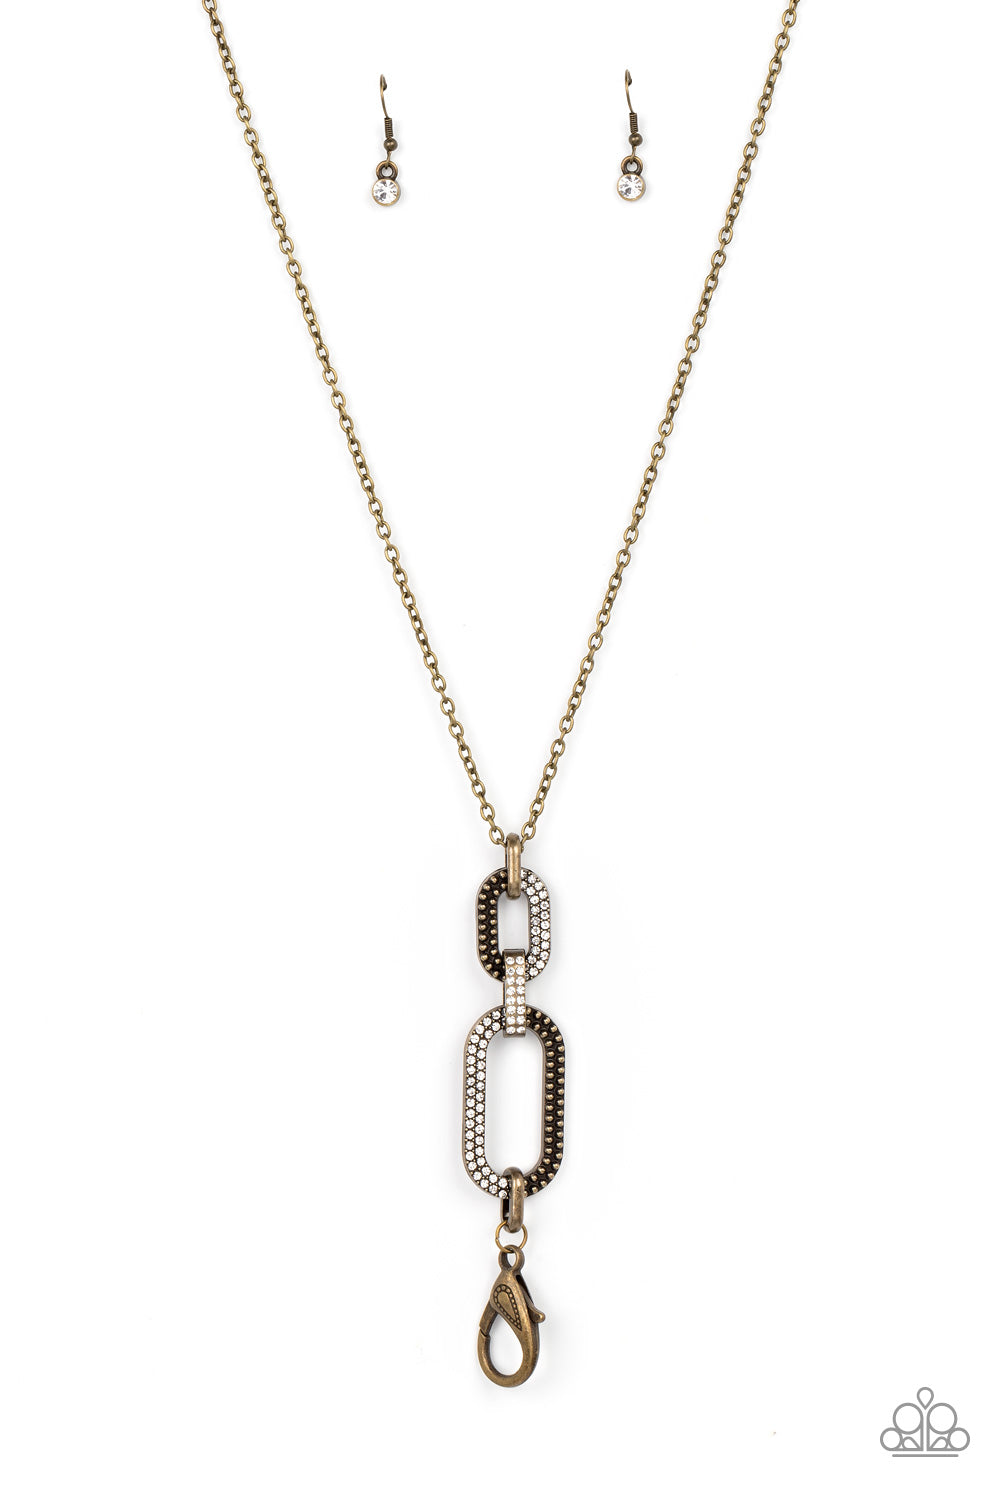 OVAL-Statement of the Year - Brass (Lanyard) Necklace